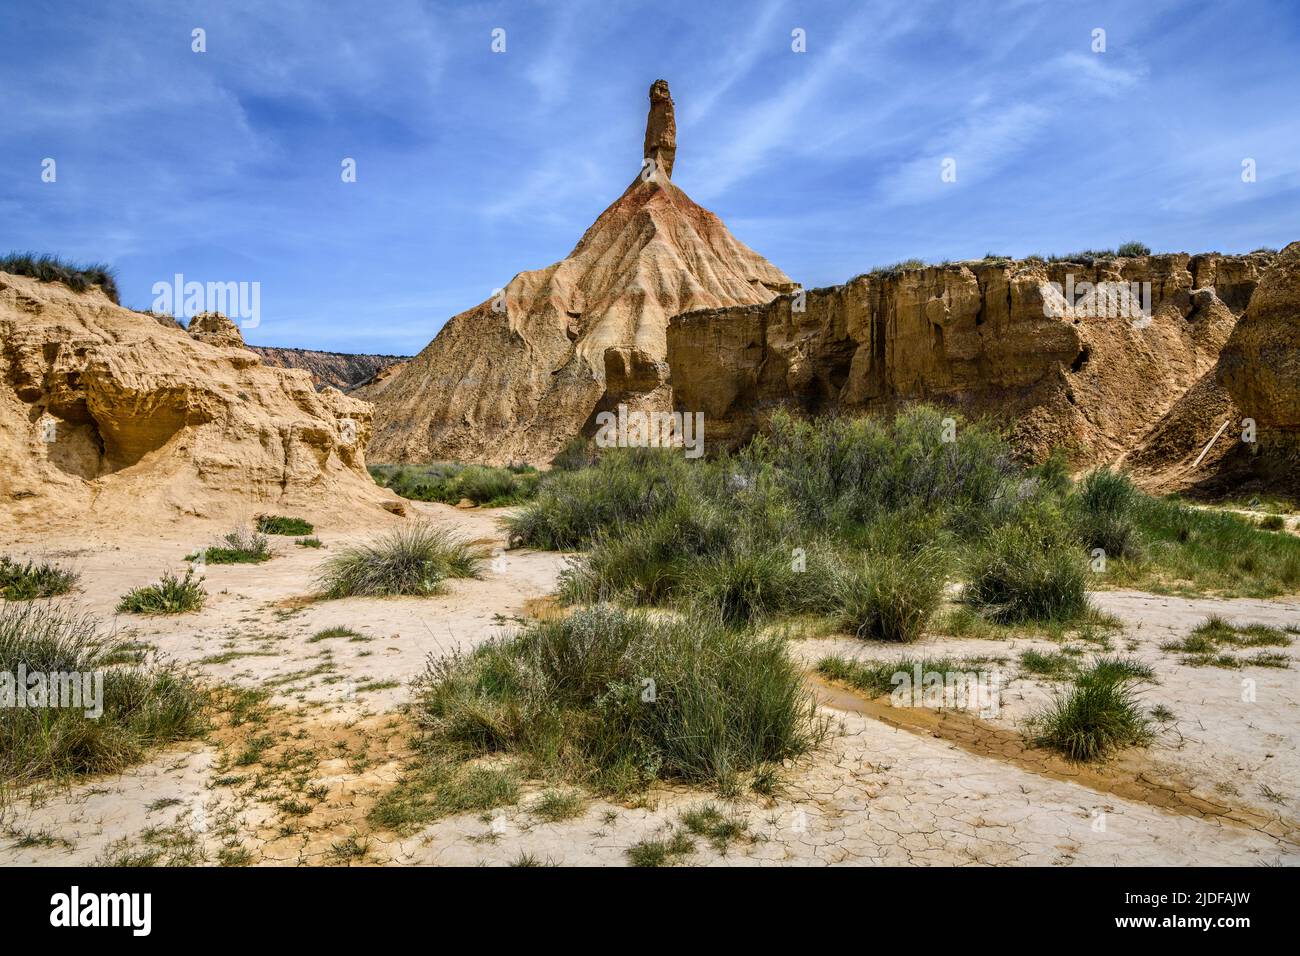 View of the castildetierra, the most famous geological formation in the Bardenas Reales desert, during the spring. A few rare vegetations grow in this Stock Photo